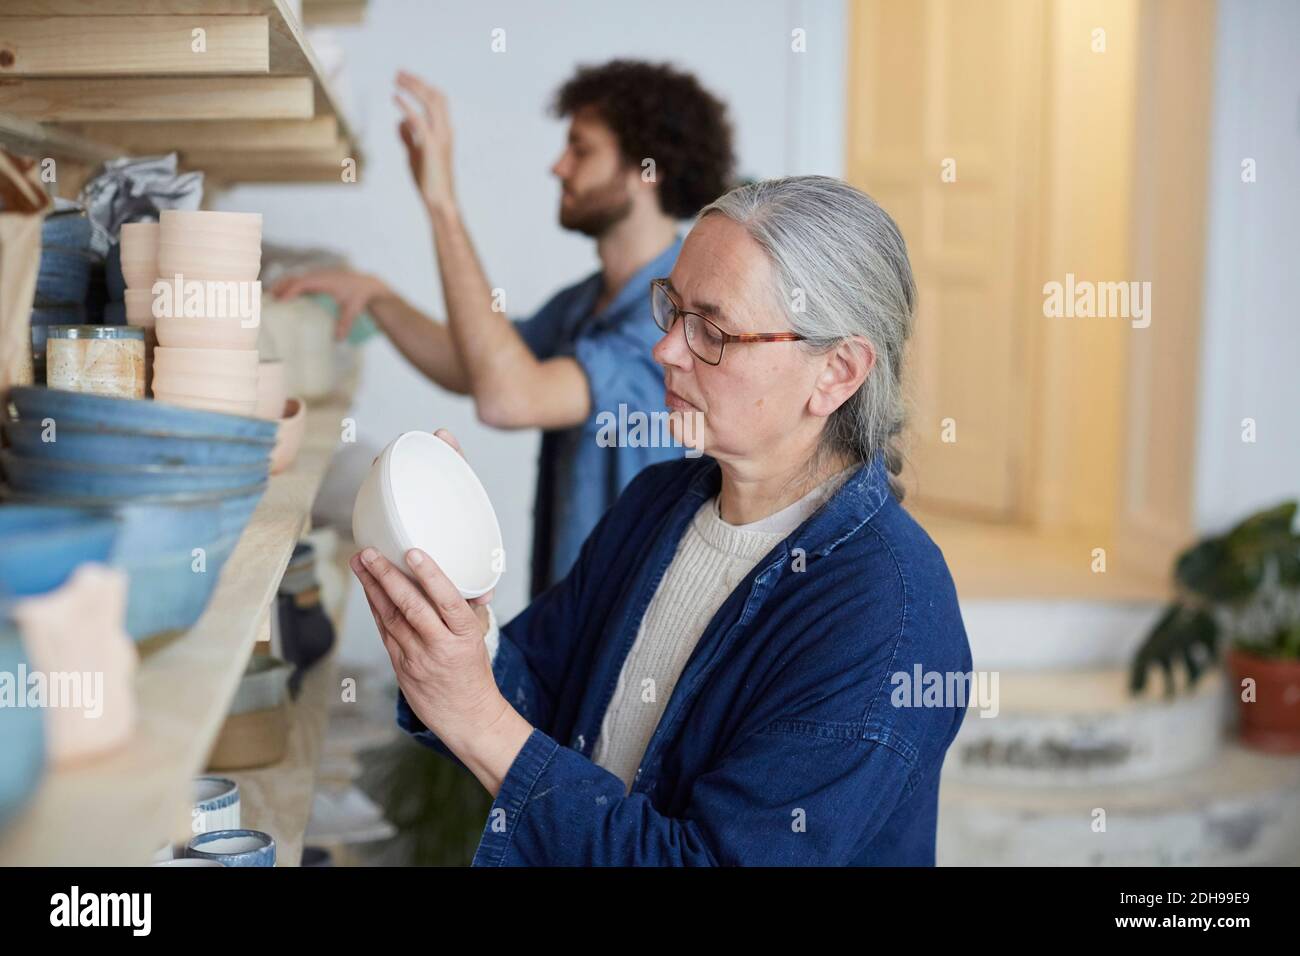 Man and woman arranging earthenware on shelf in art class Stock Photo